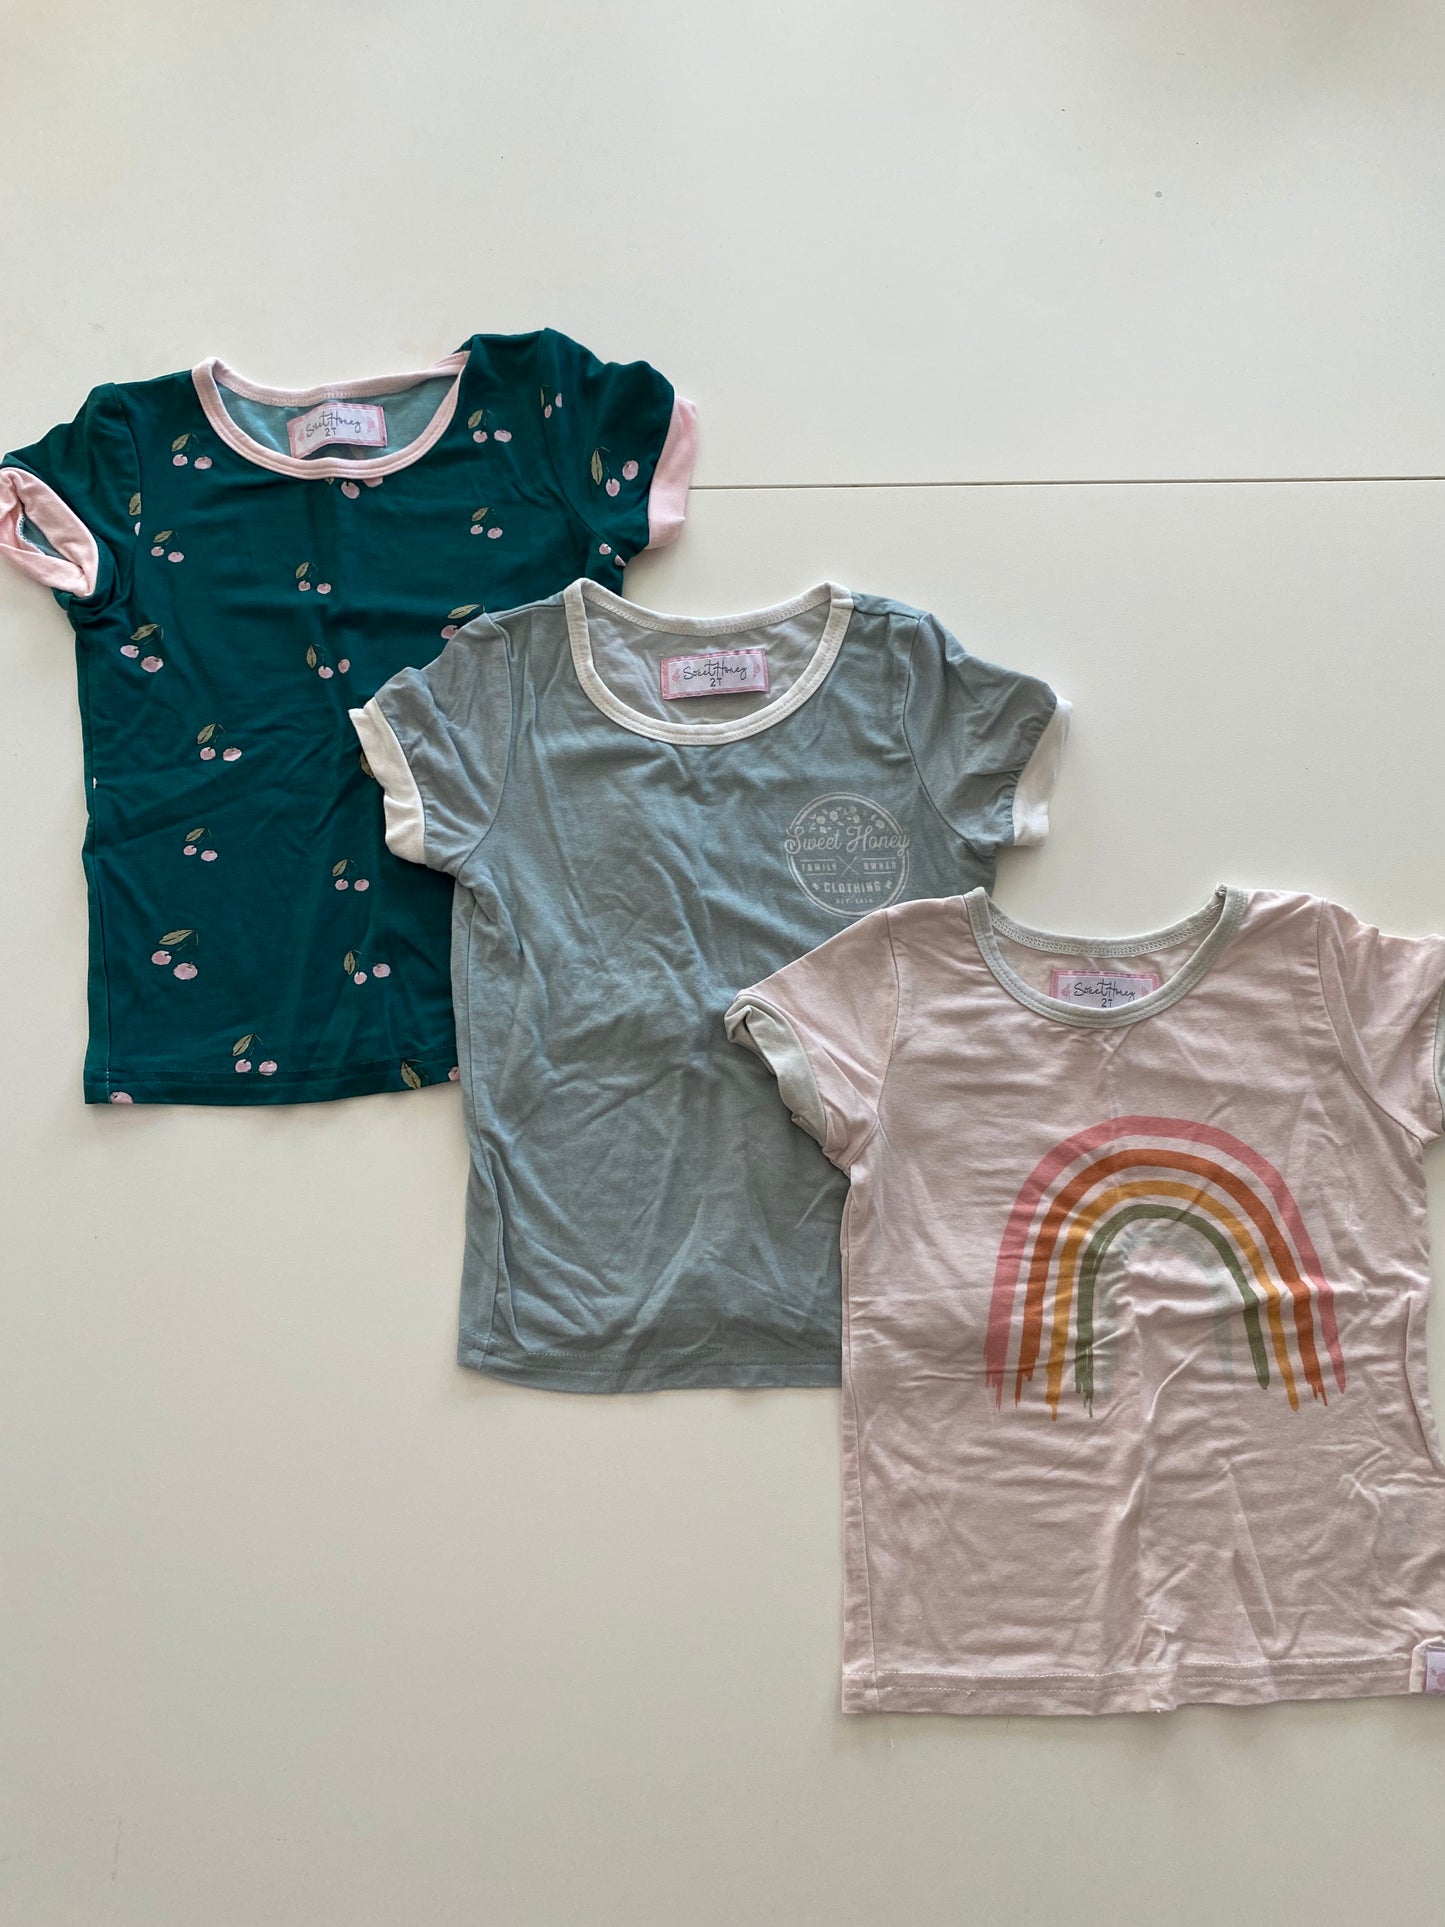 SweetHoney T-shirt Bundle Girls 2T green with pink cherries and blue logo print and pink rainbow